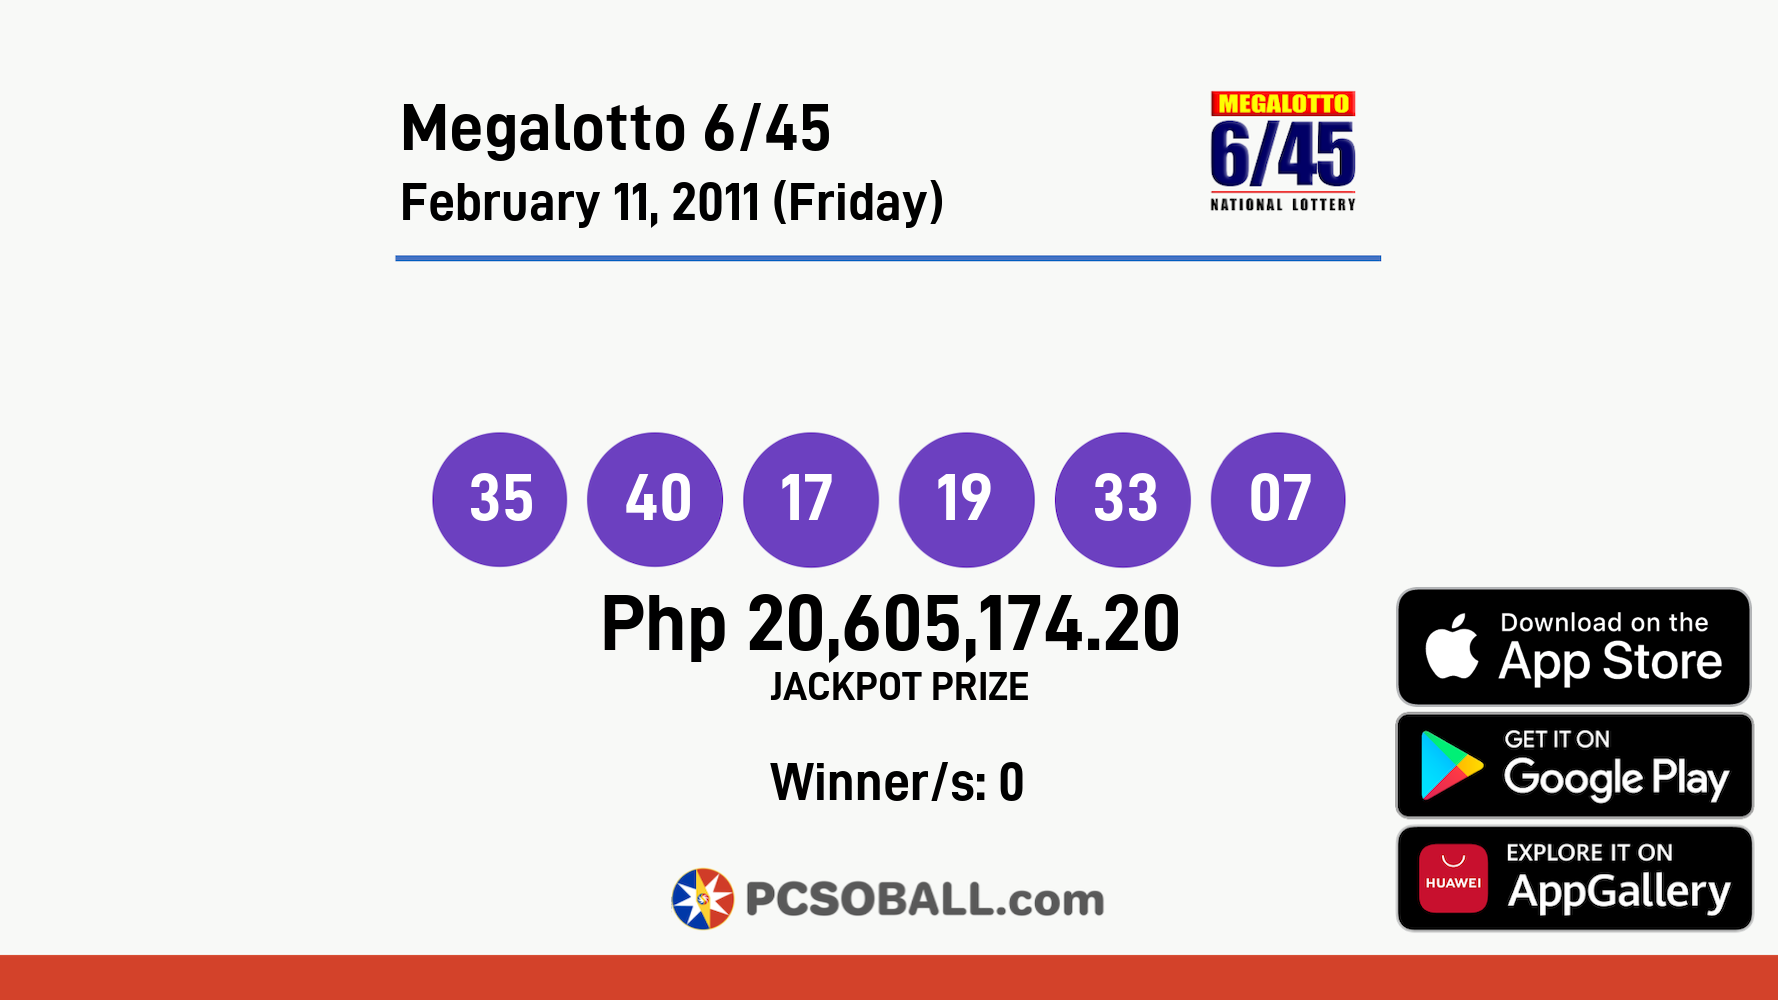 Megalotto 6/45 February 11, 2011 (Friday) Result